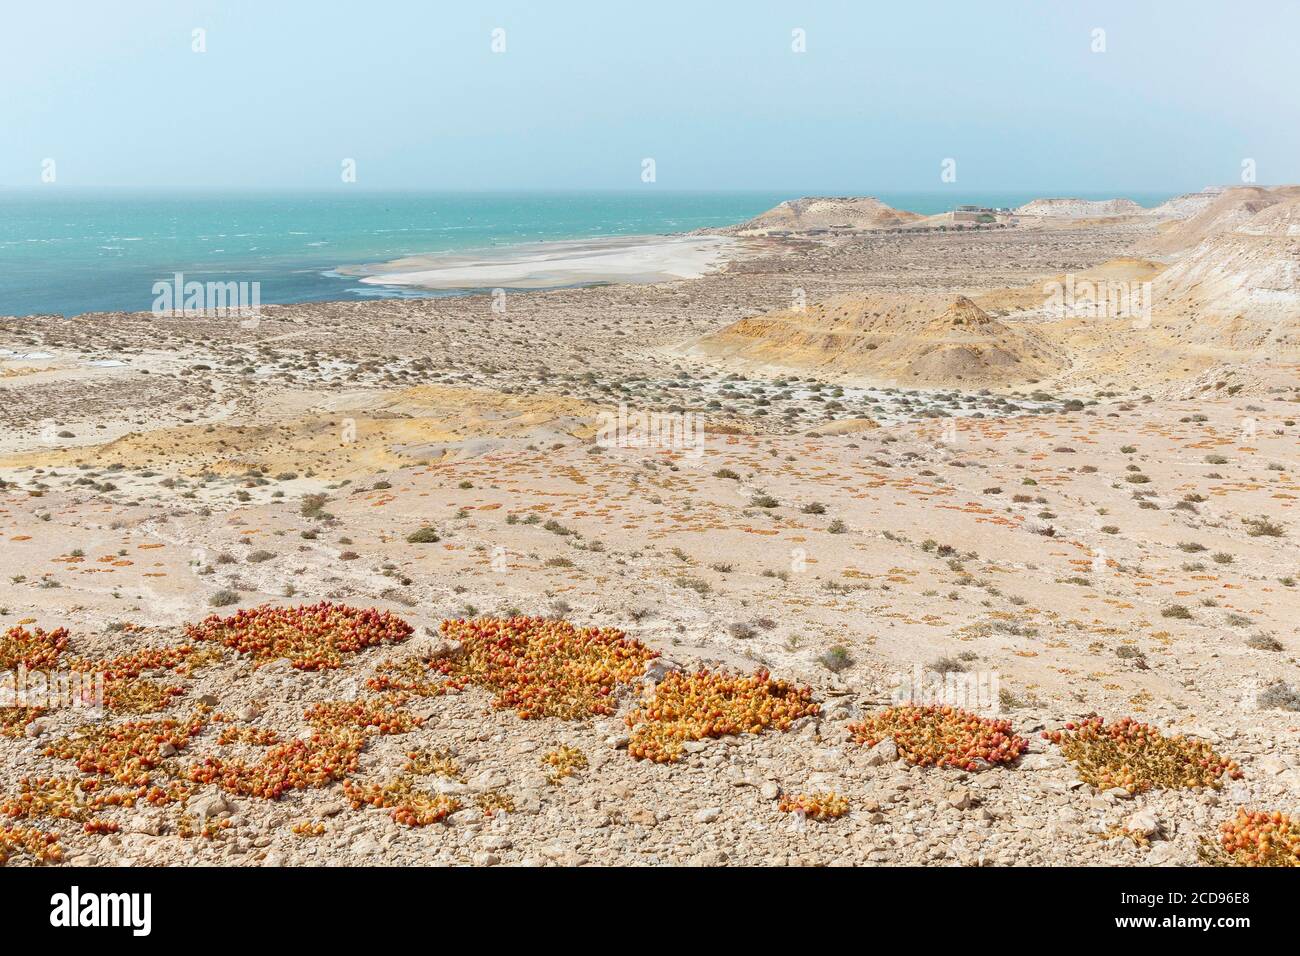 Marocco, Oued Ed-Dahab, Dakhla, view of an eco-lodge in a desert setting by the sea Stock Photo